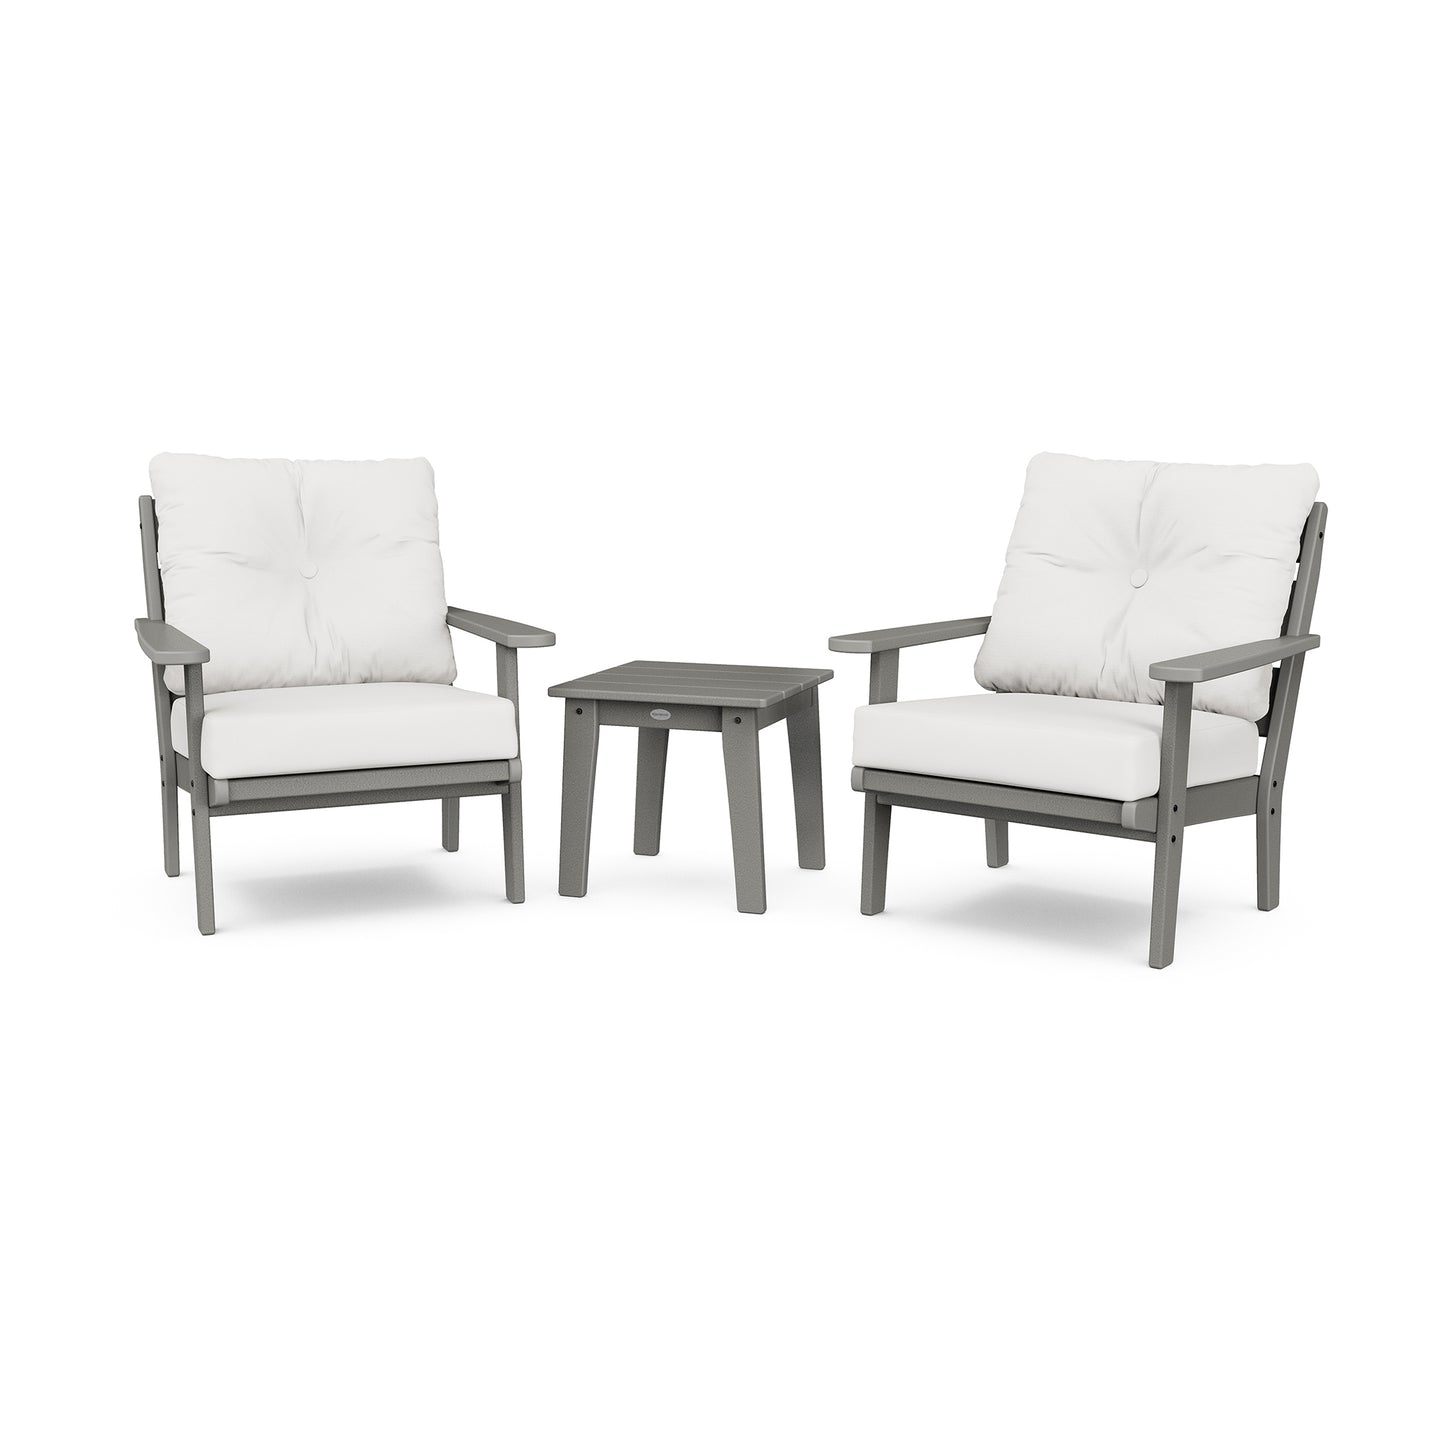 Two POLYWOOD Lakeside 3-Piece Deep Seating Chairs with white cushions and a matching gray side table, displayed against a white background.